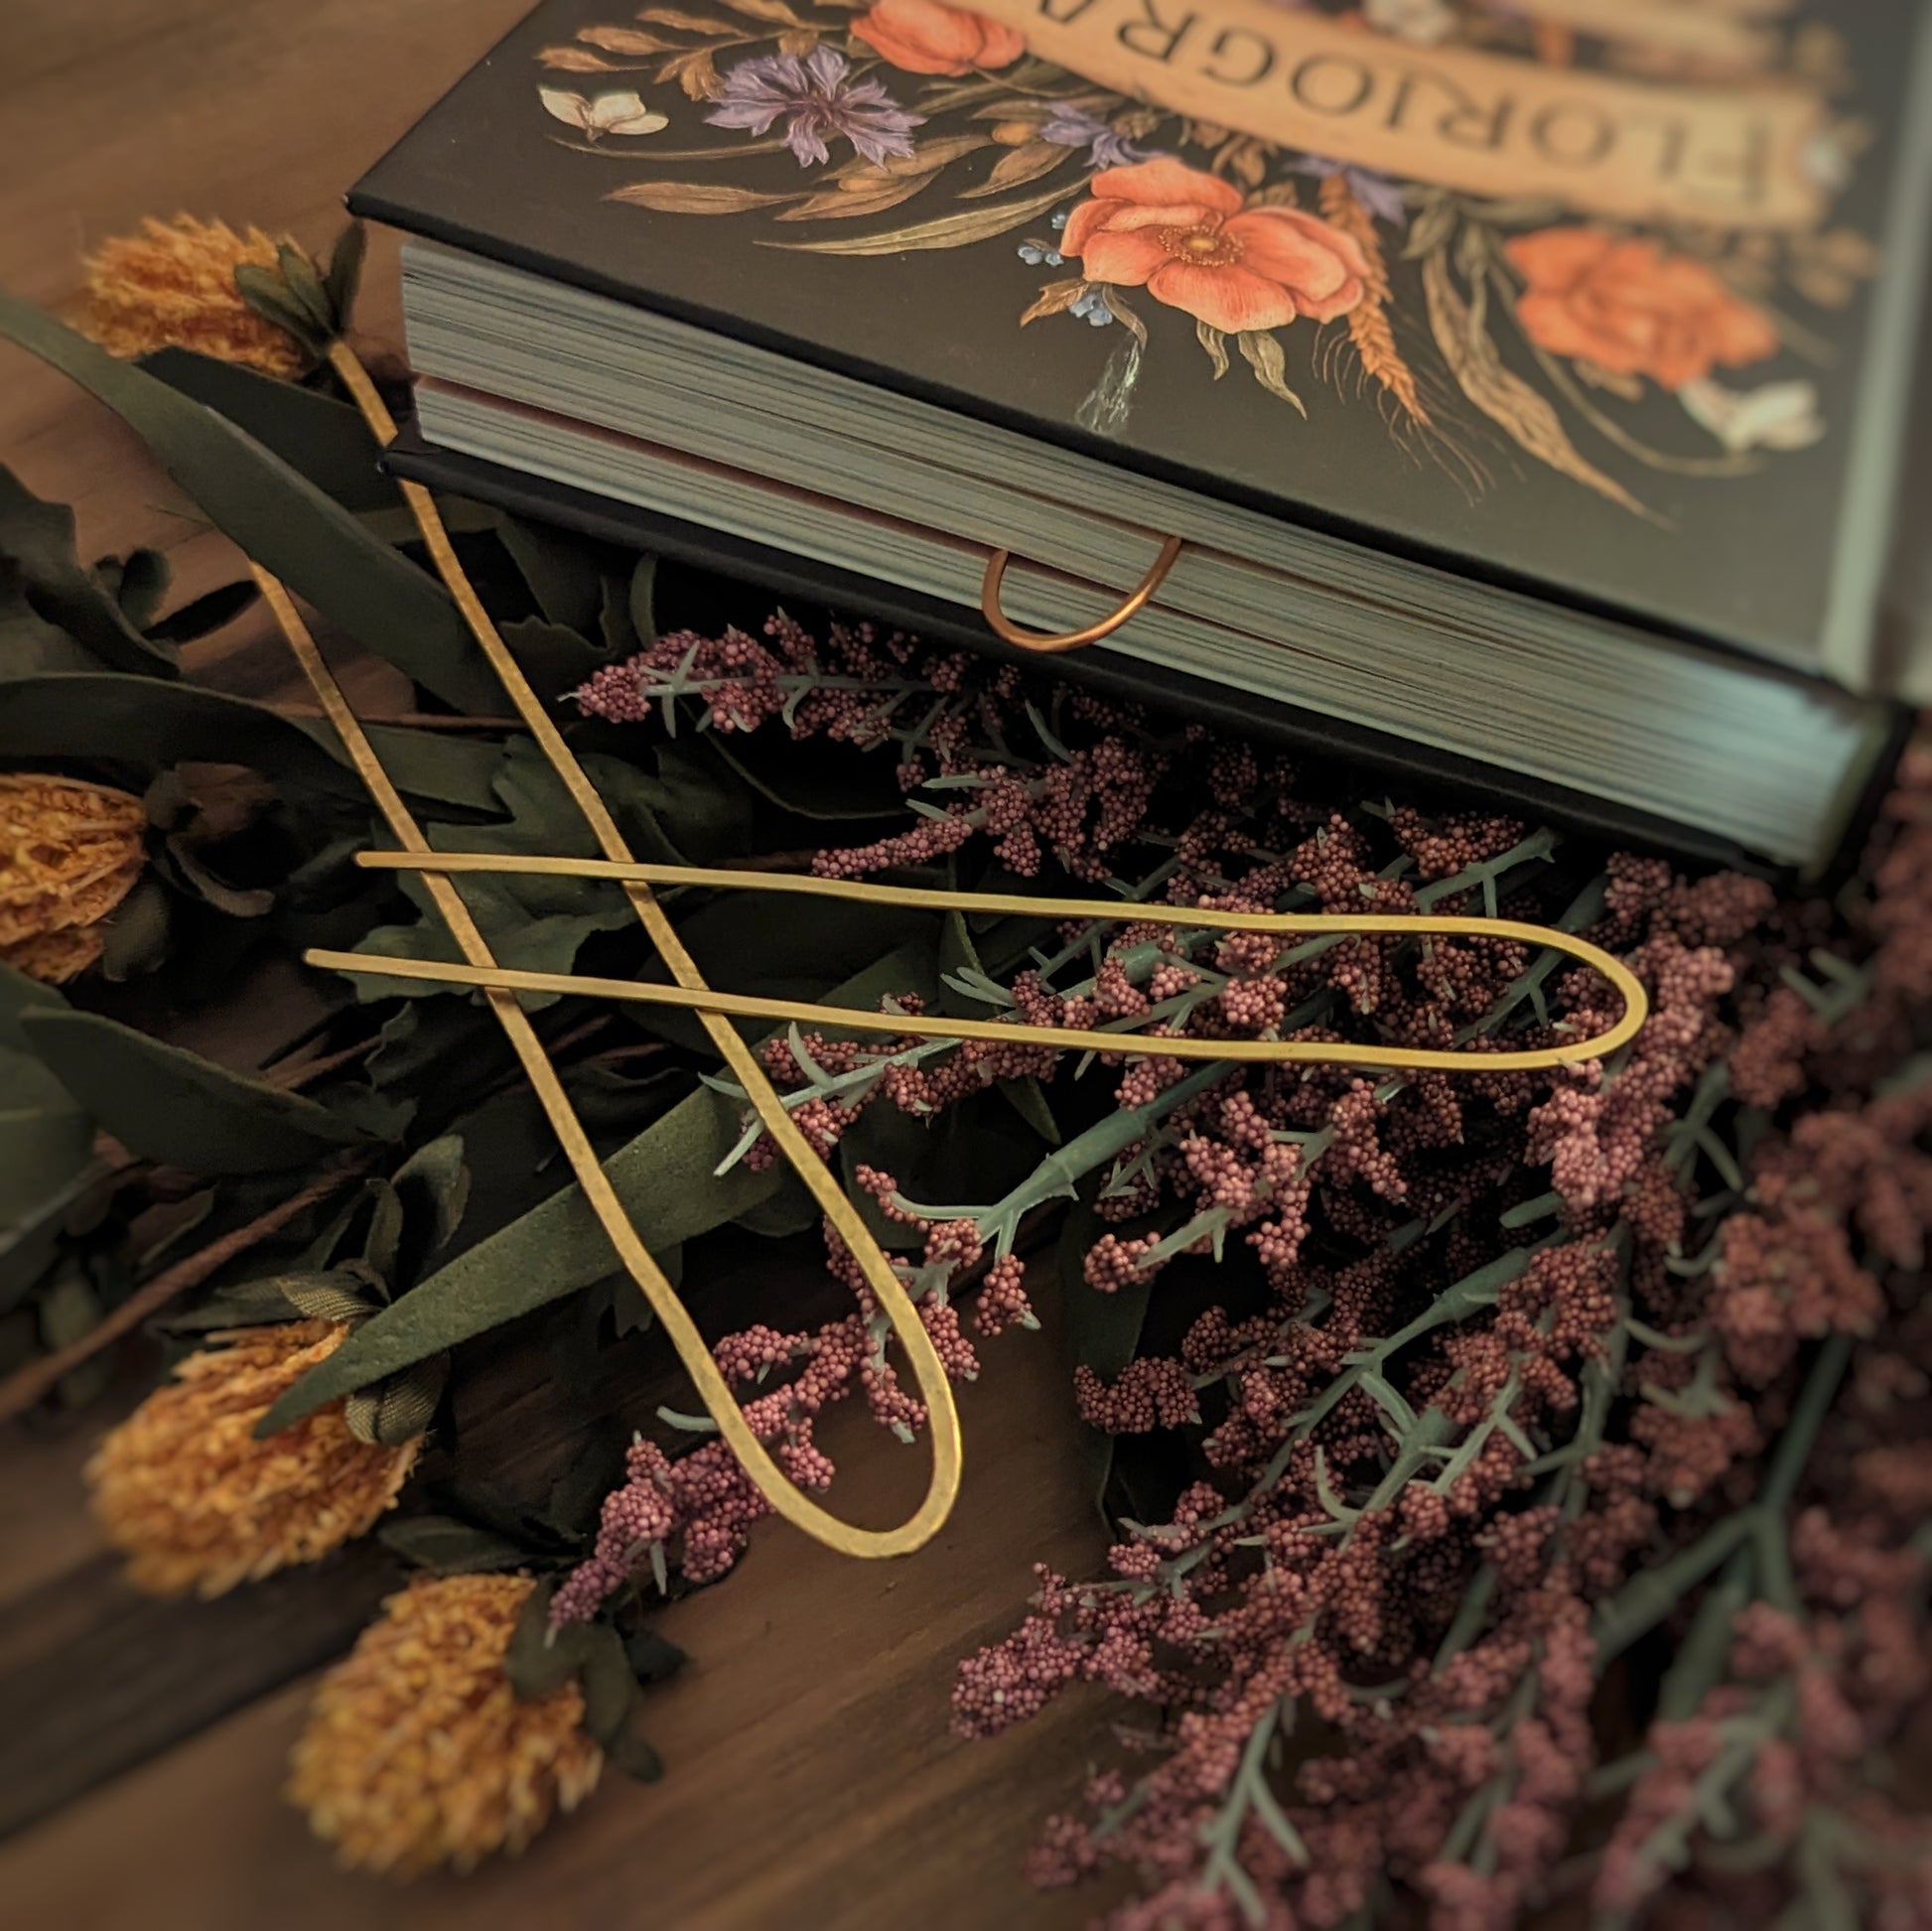 A copy of Floriography has a hammered copper wire book mark in the shape of a long, 2 prong fork with two brass book forks sitting on flowers next to it.